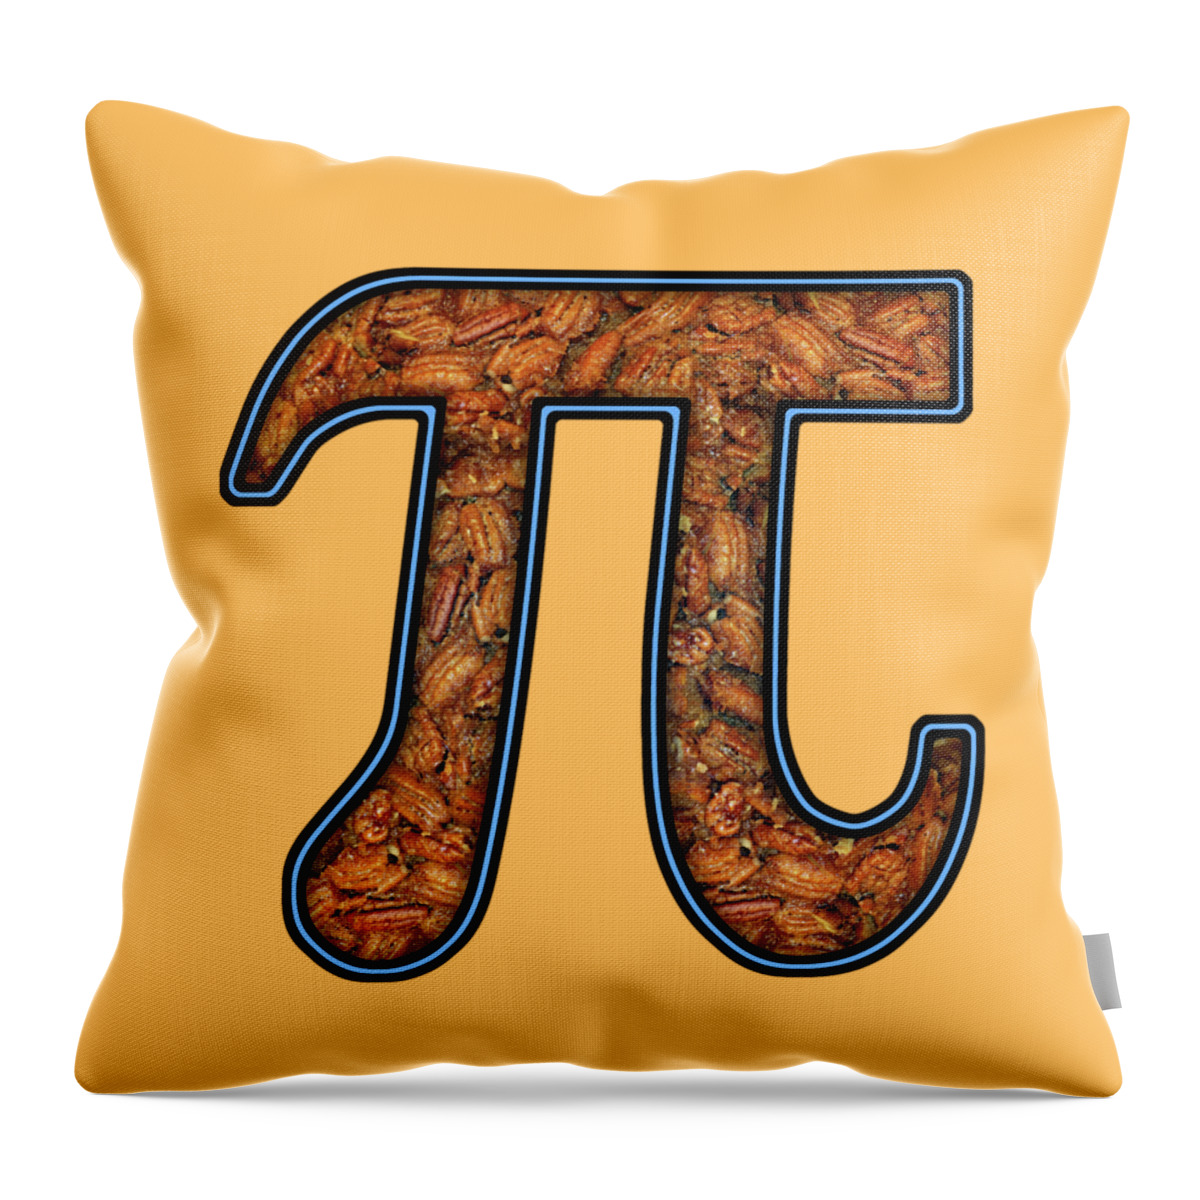 Pecan Pi Throw Pillow featuring the digital art Pi - Food - Pecan Pie by Mike Savad